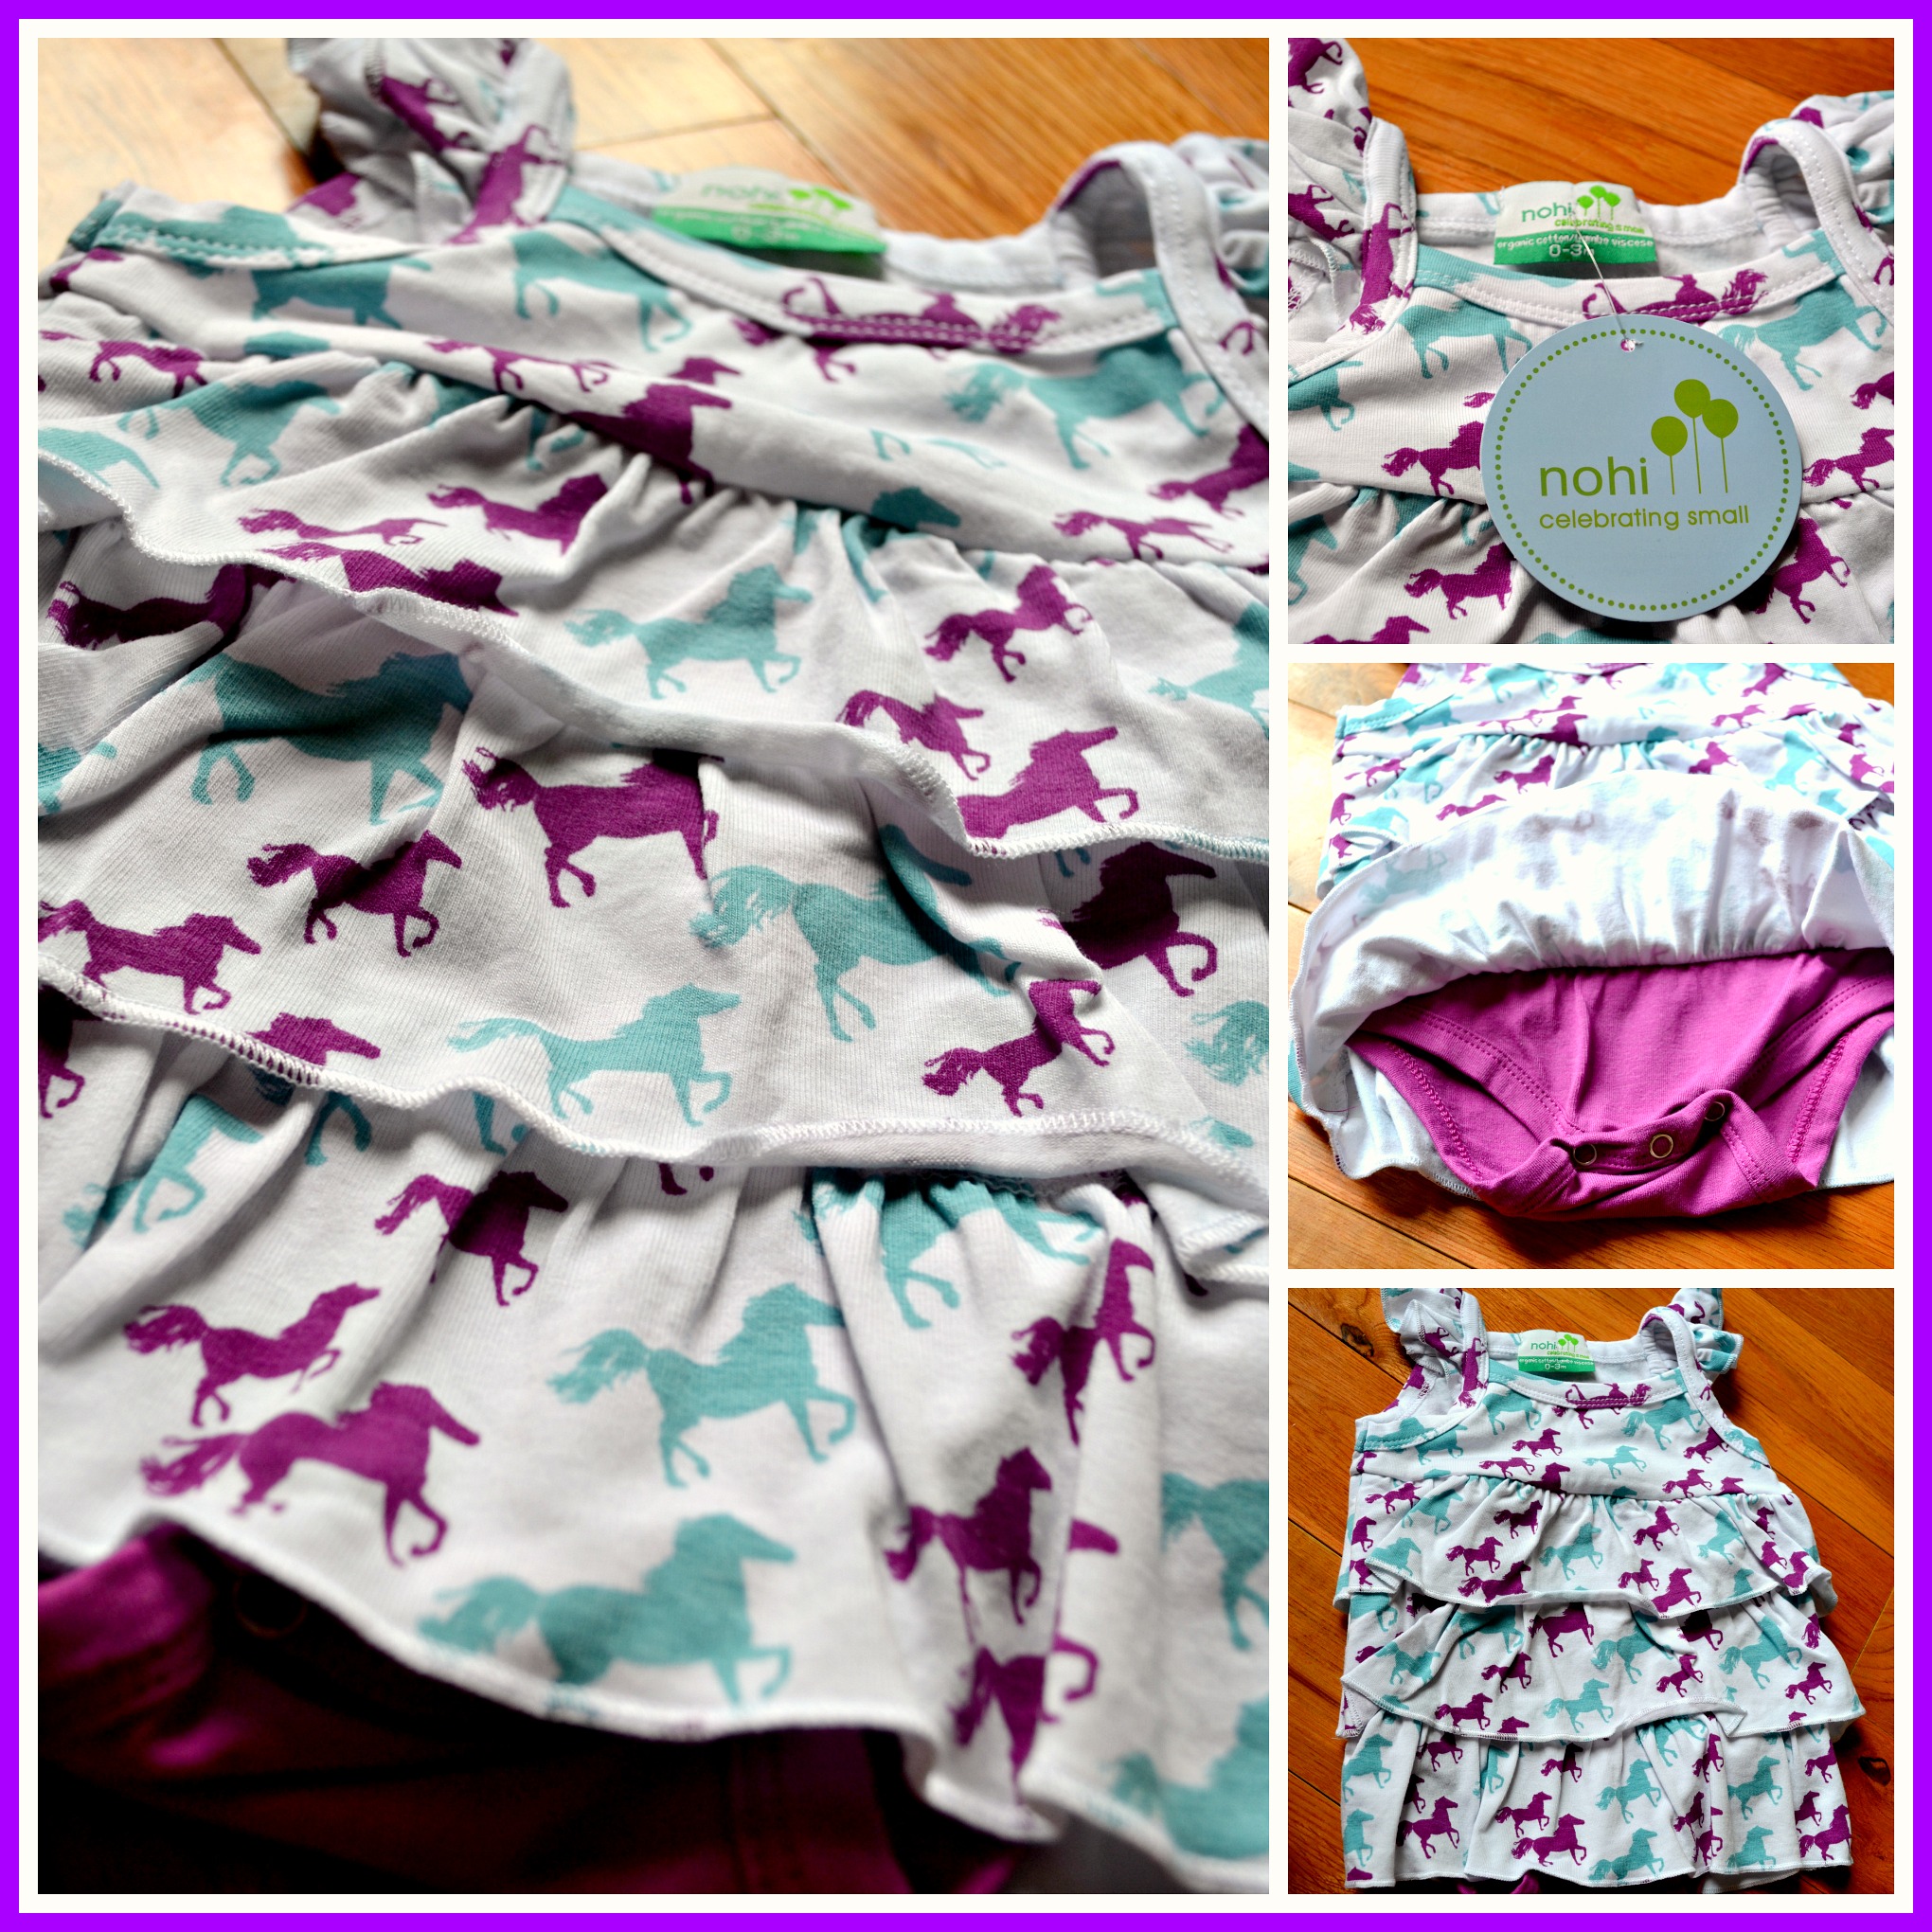 Nohi Kids Clothing Review (Getting Ready For Baby Gift Guide)